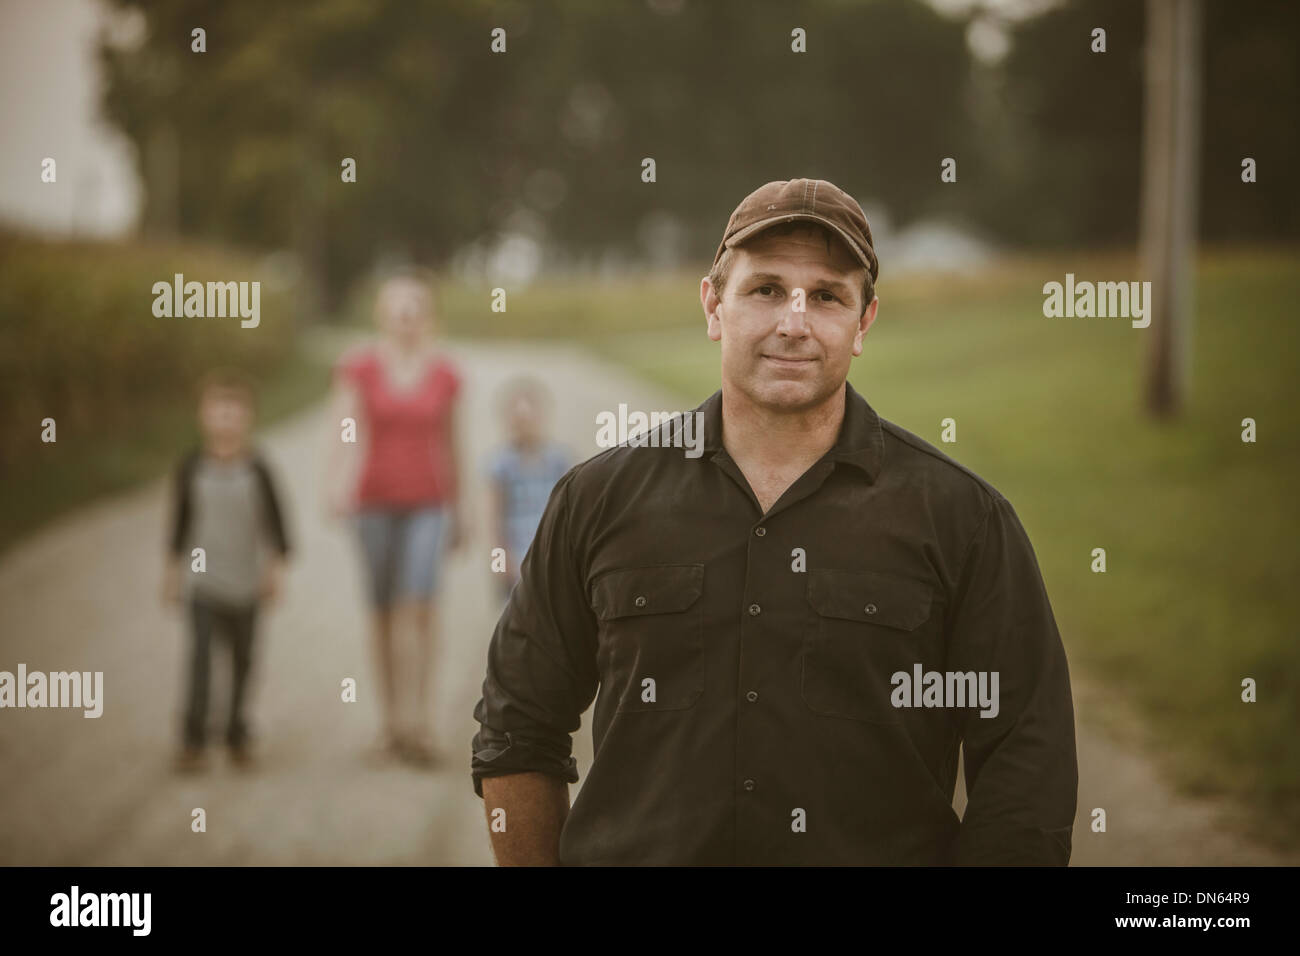 Caucasian farmer with family on dirt road Stock Photo